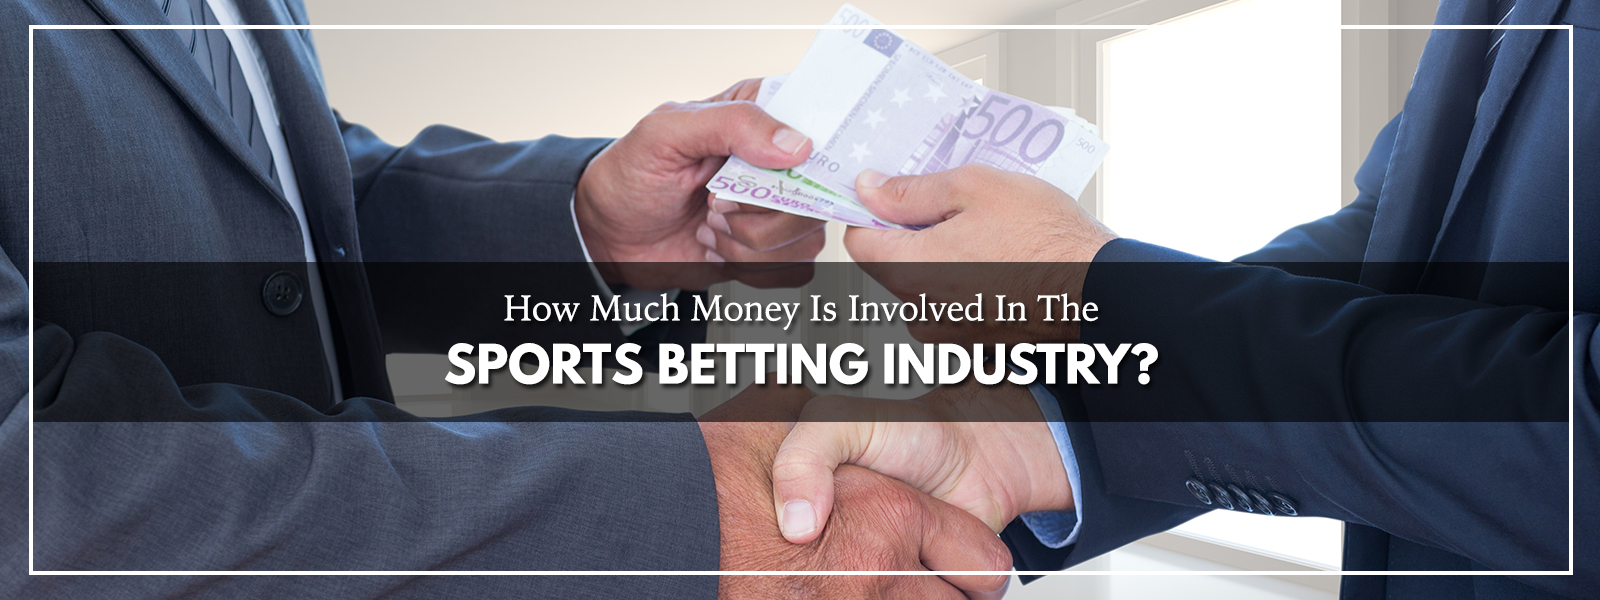 How Much Money Is Involved In The Sports Betting Industry?